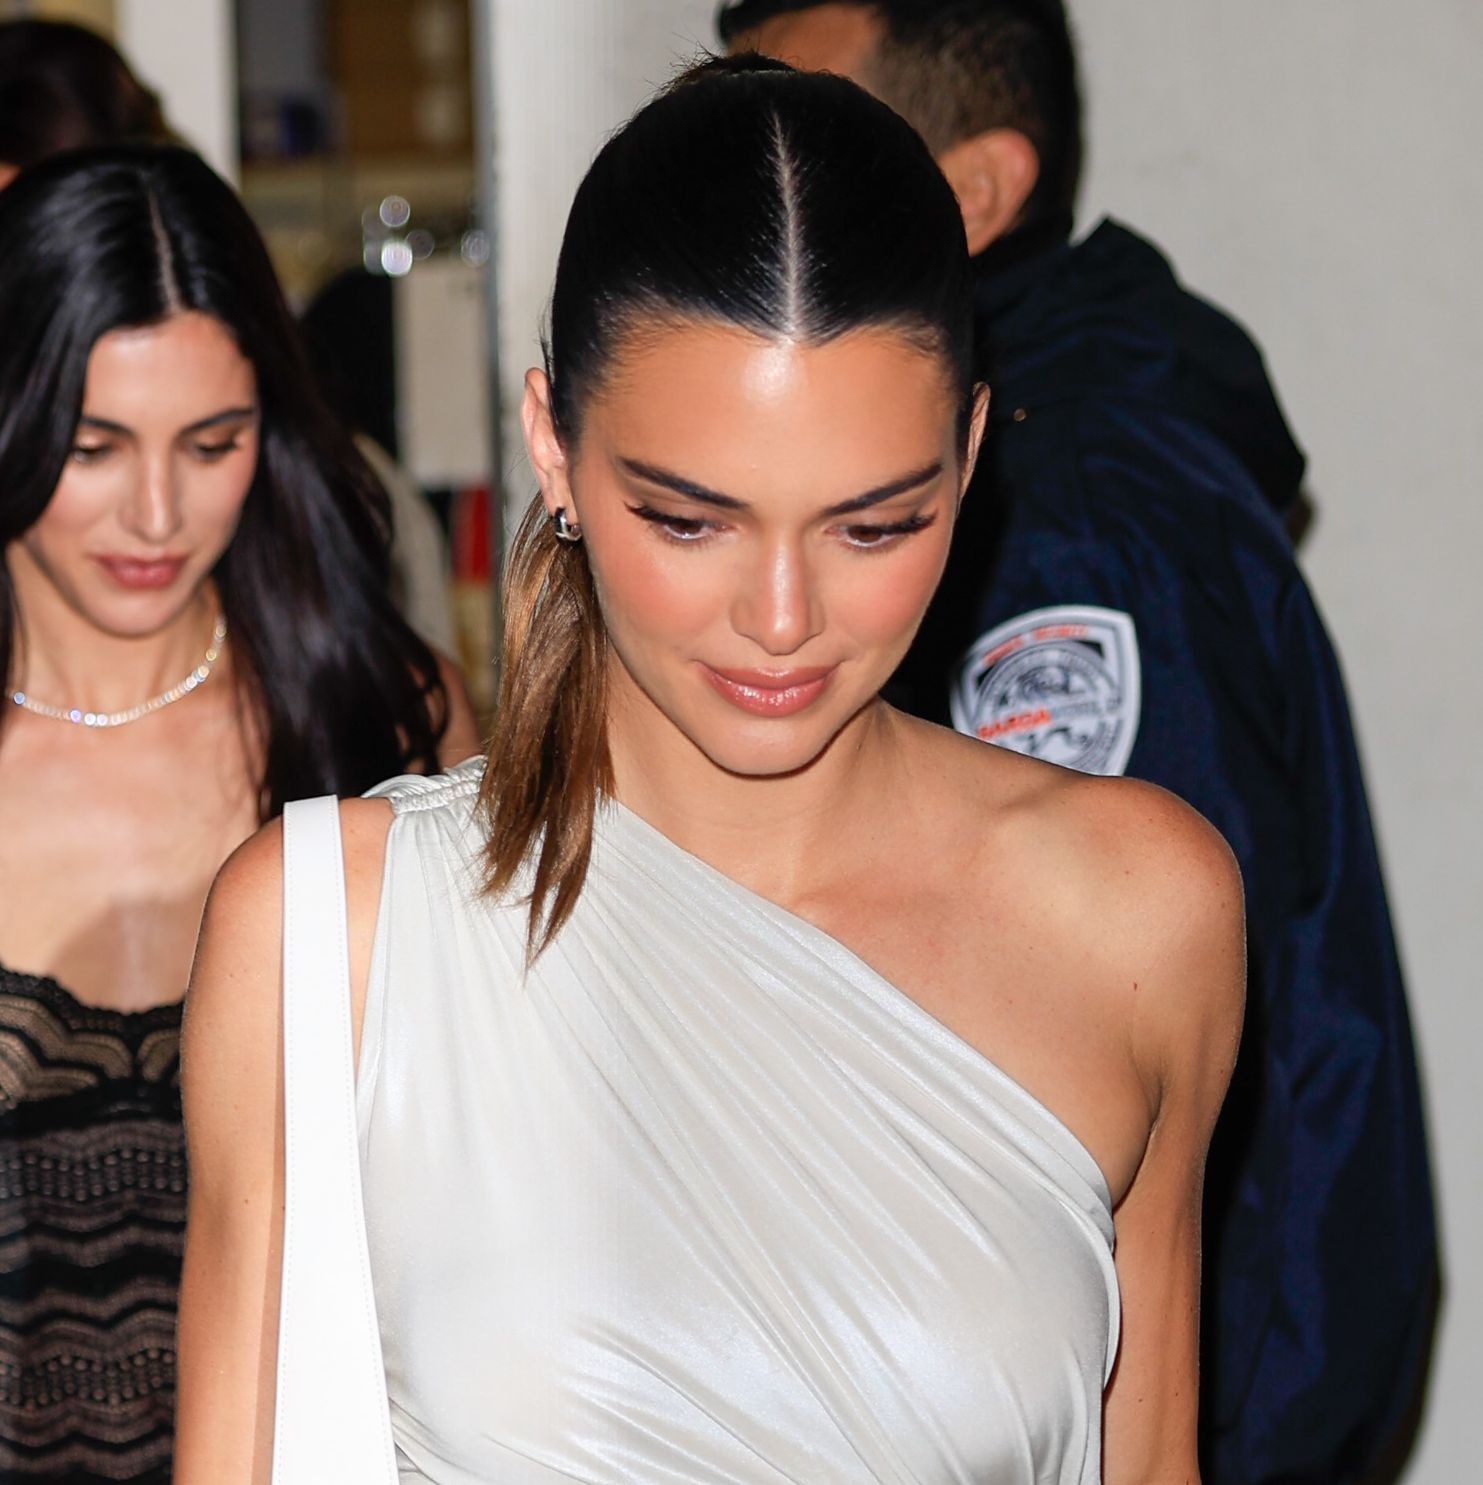 Kendall Jenner Wears White Bodycon Minidress to Pop Up Event